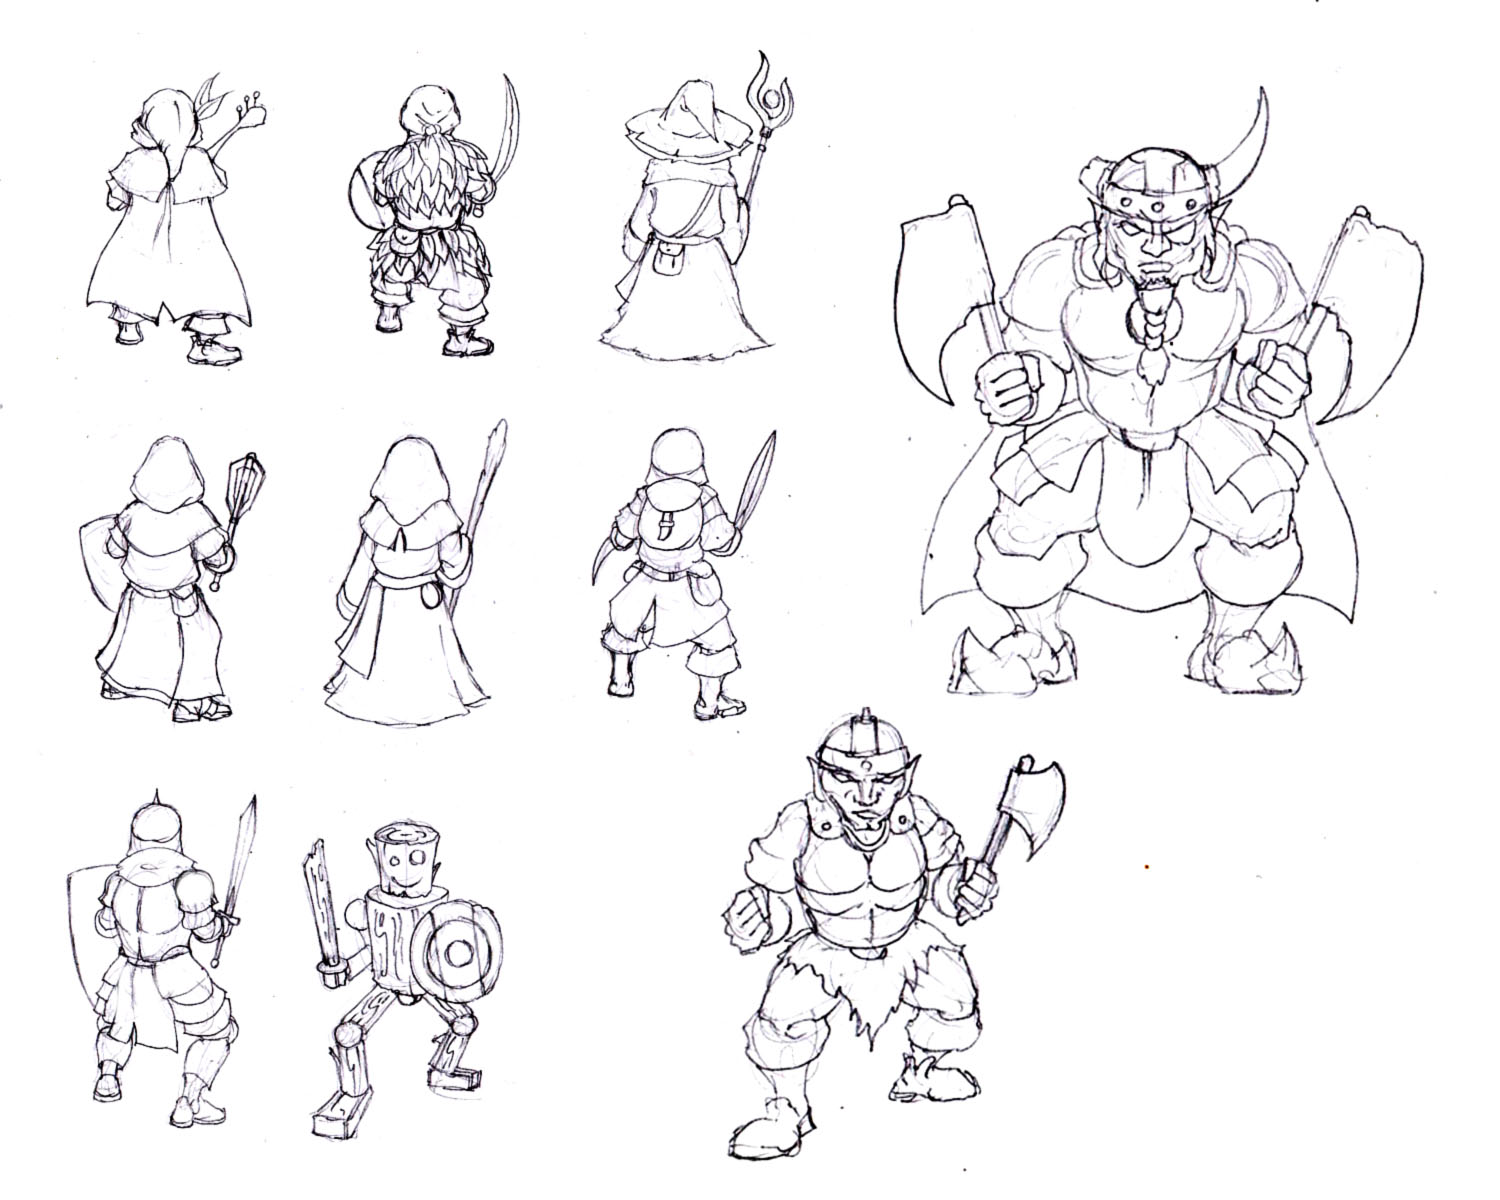 Character sketches